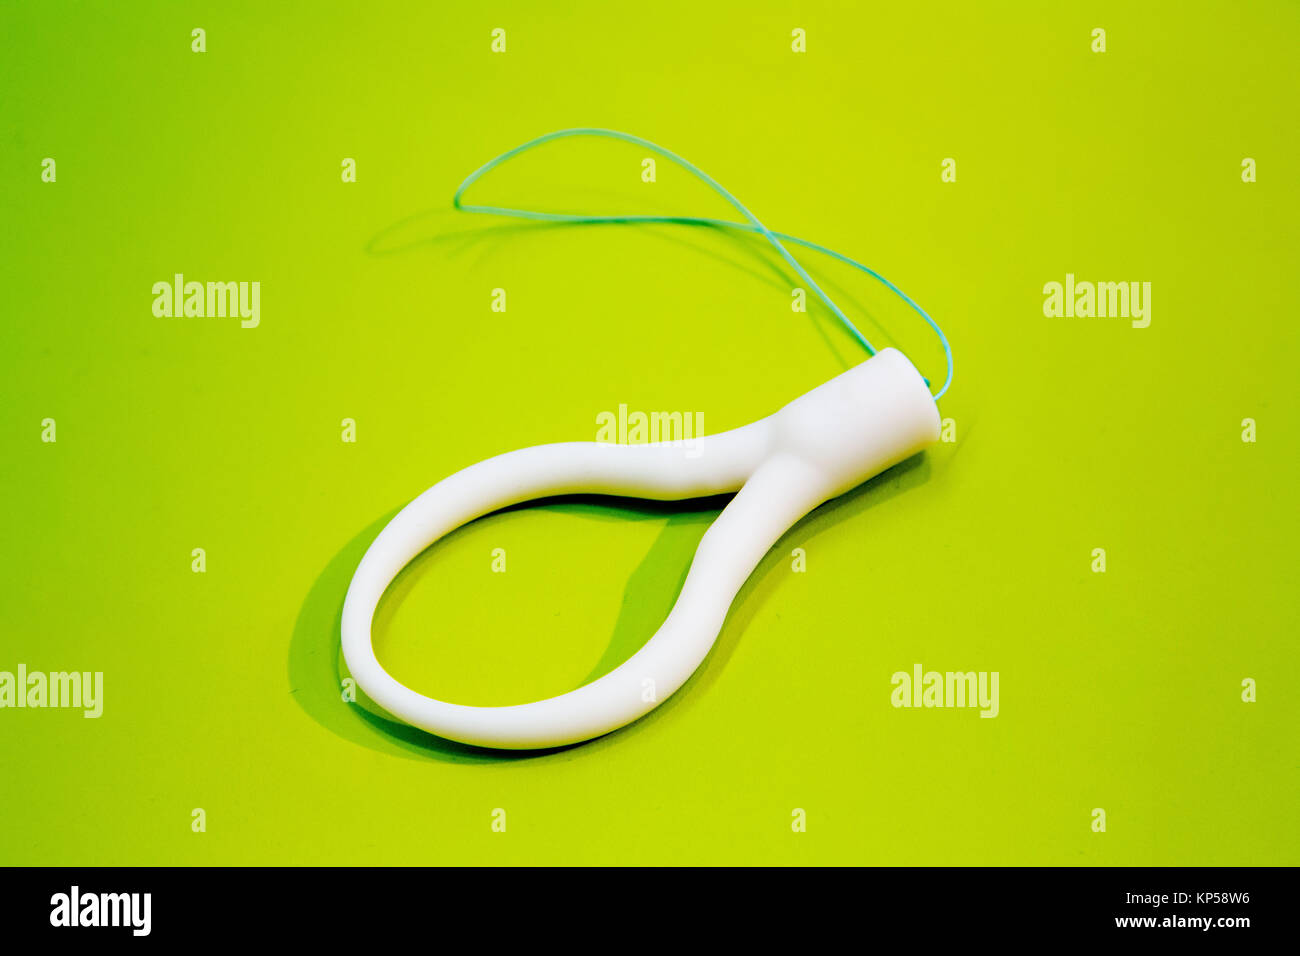 Diveen ®, an intravaginal medical device for the management of stress urinary incontinence. Stock Photo